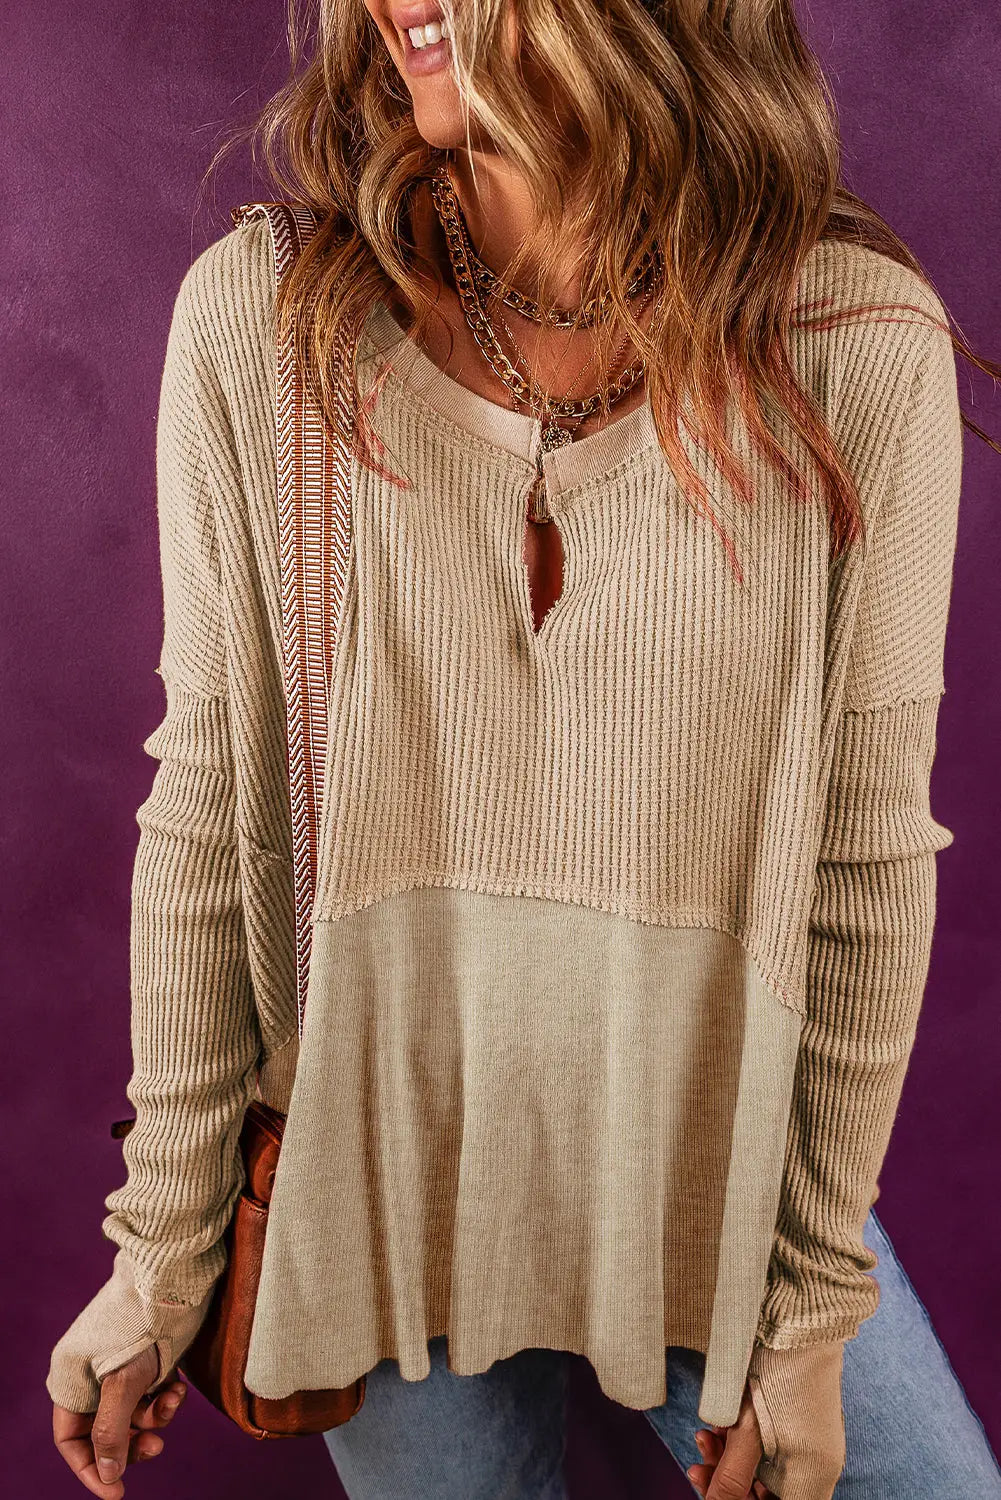 Light french beige exposed seam slit neck waffle knit patchwork top - s 62.7% polyester + 37.3% cotton long sleeve tops